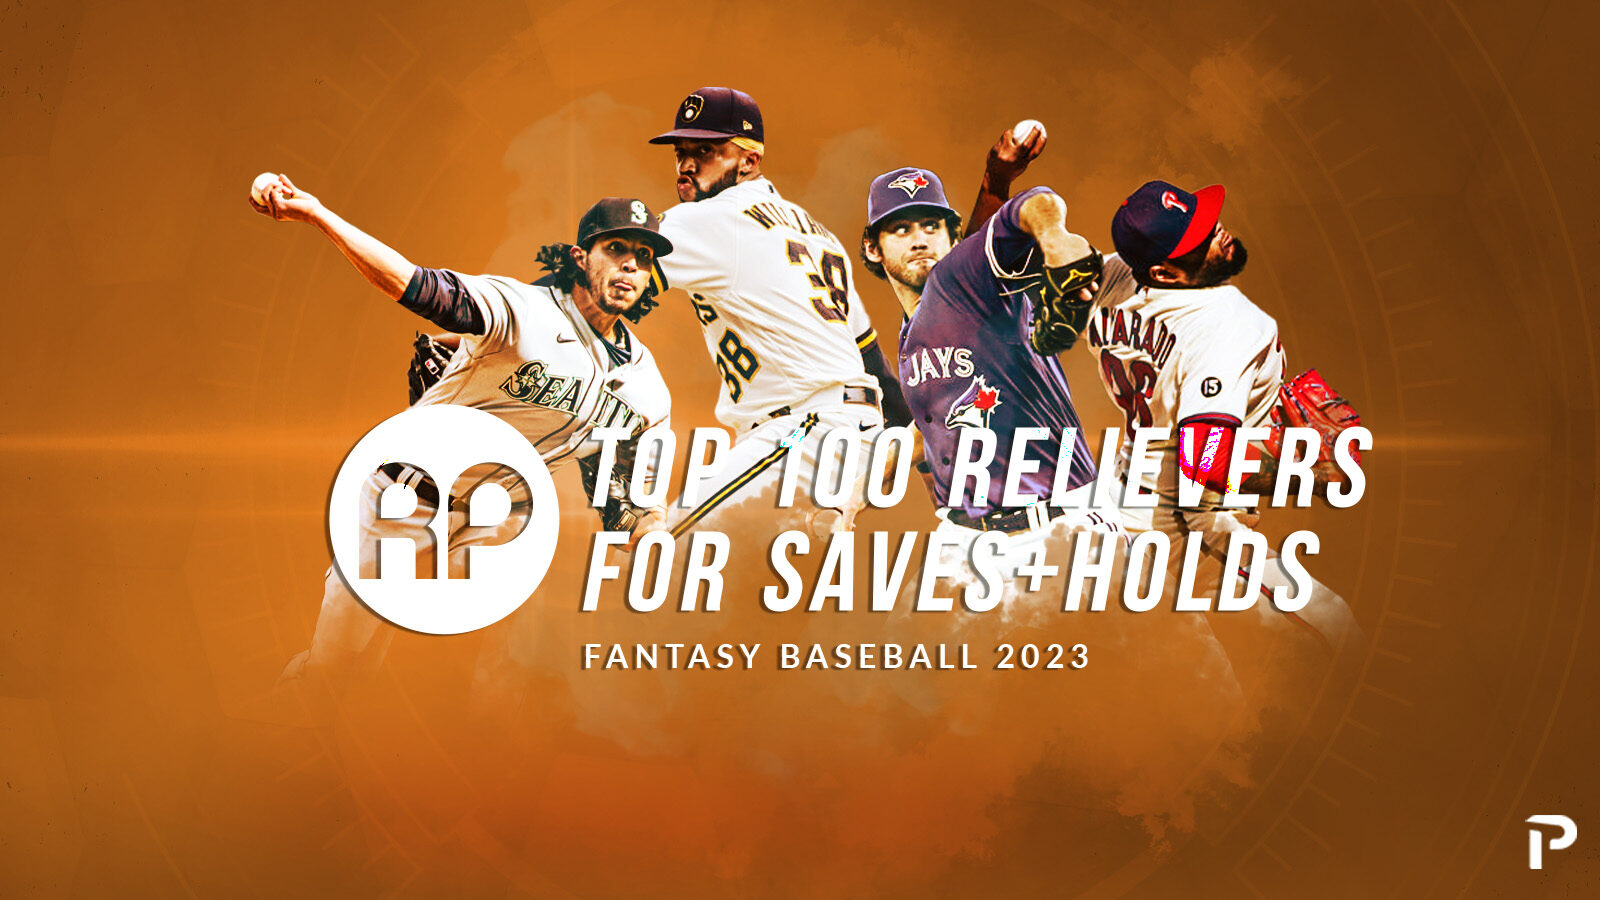 Top 100 Relievers for Save+Hold Leagues For Fantasy Baseball 2023